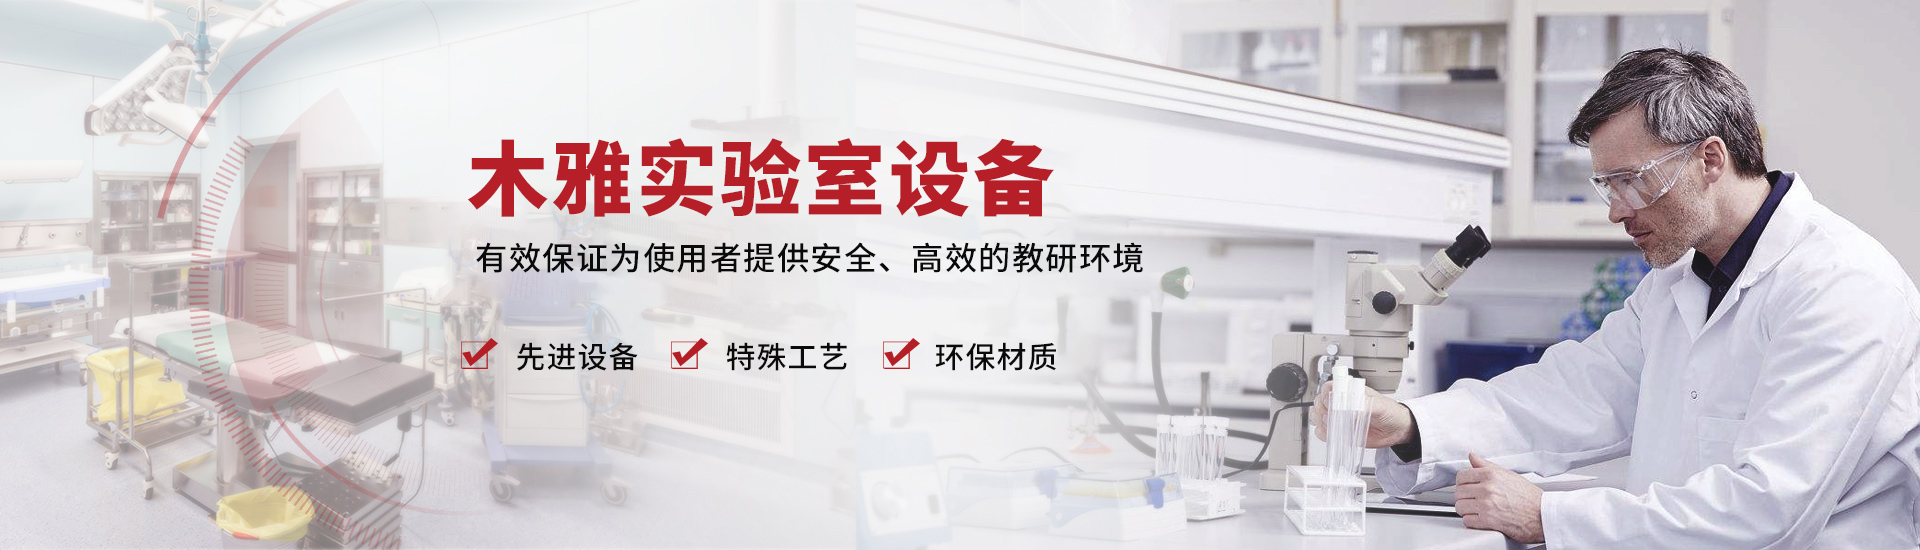 Laboratory cleaning system